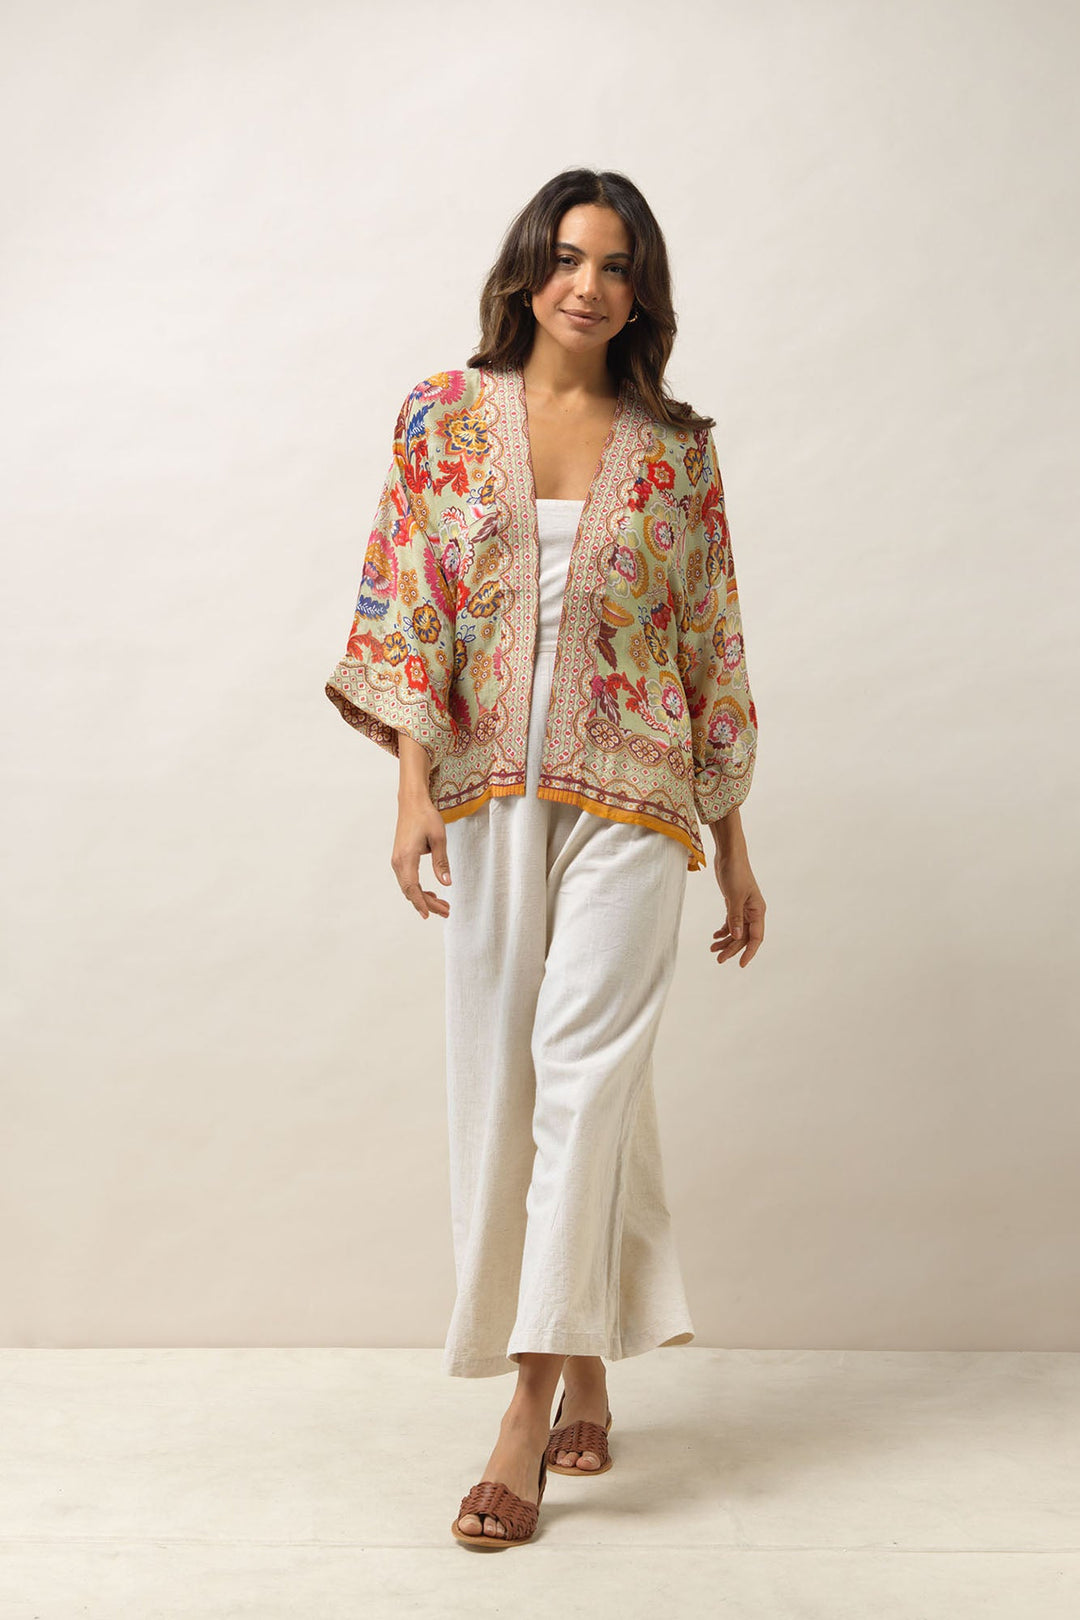 Women's short kimono in taupe with Indian flower floral print by One Hundred Stars